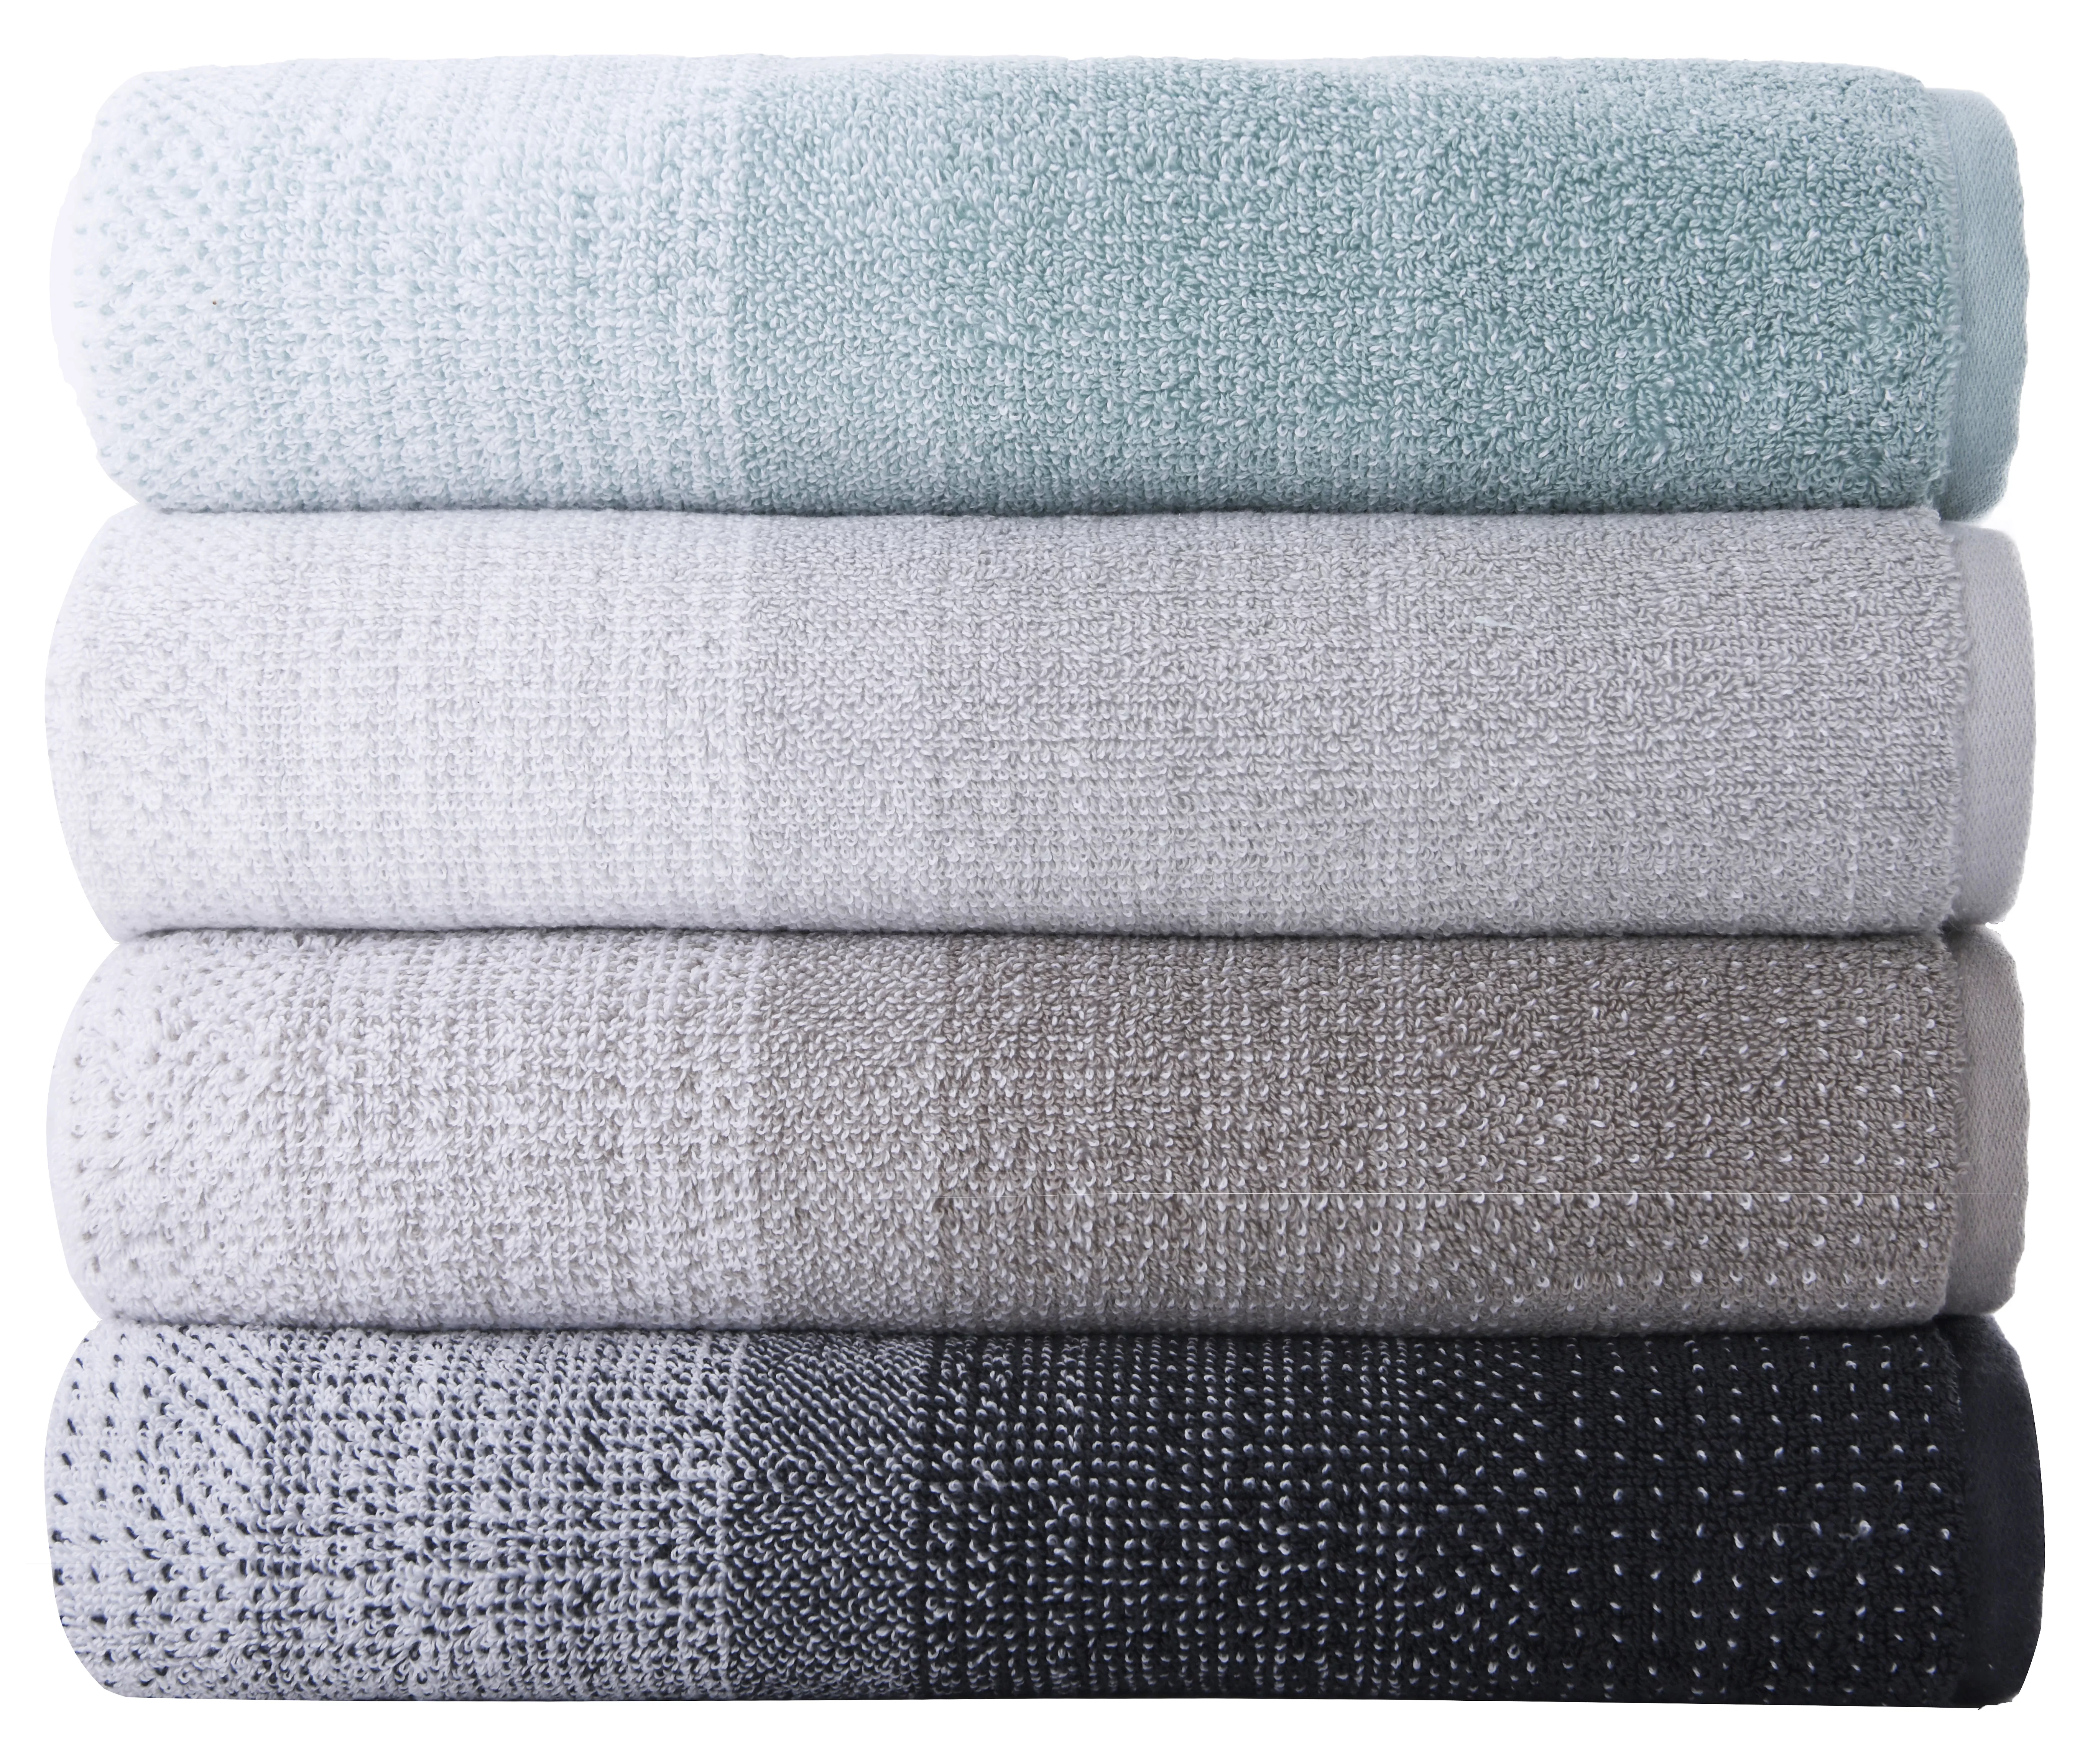 Better Homes & Gardens Thick and Plush Heathered Towel Collection